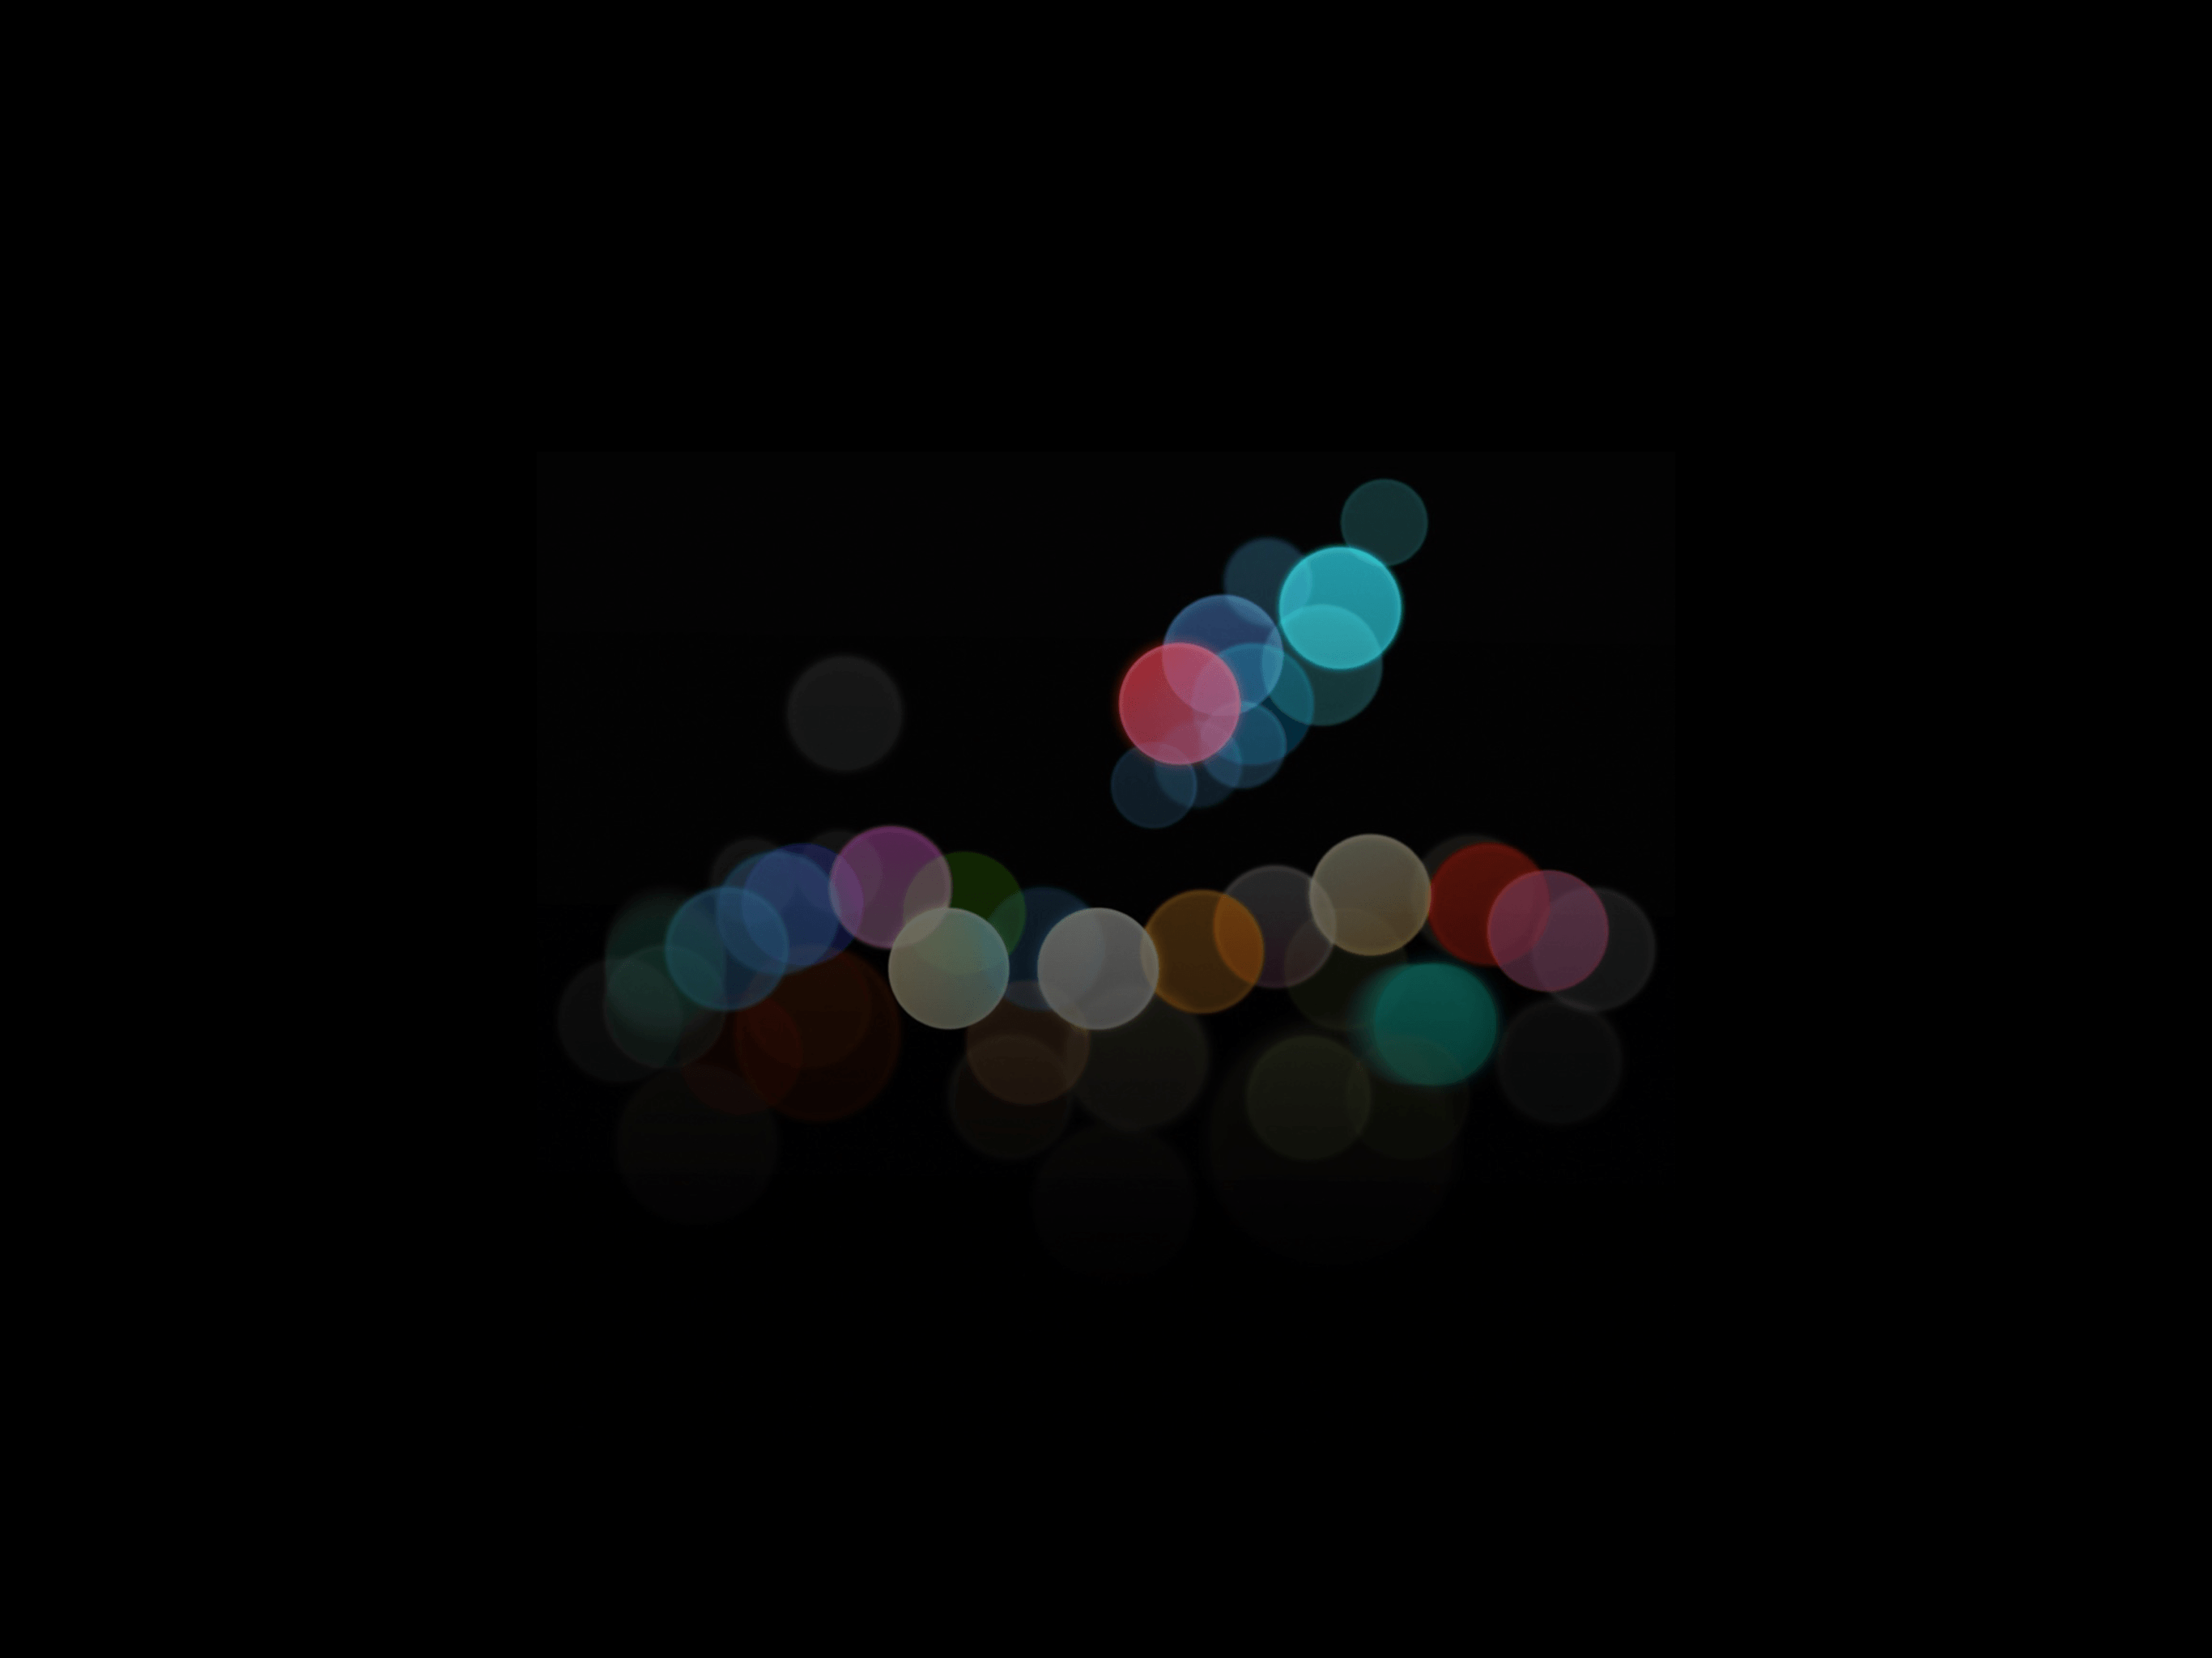 September 7 Apple event wallpaper: See you on